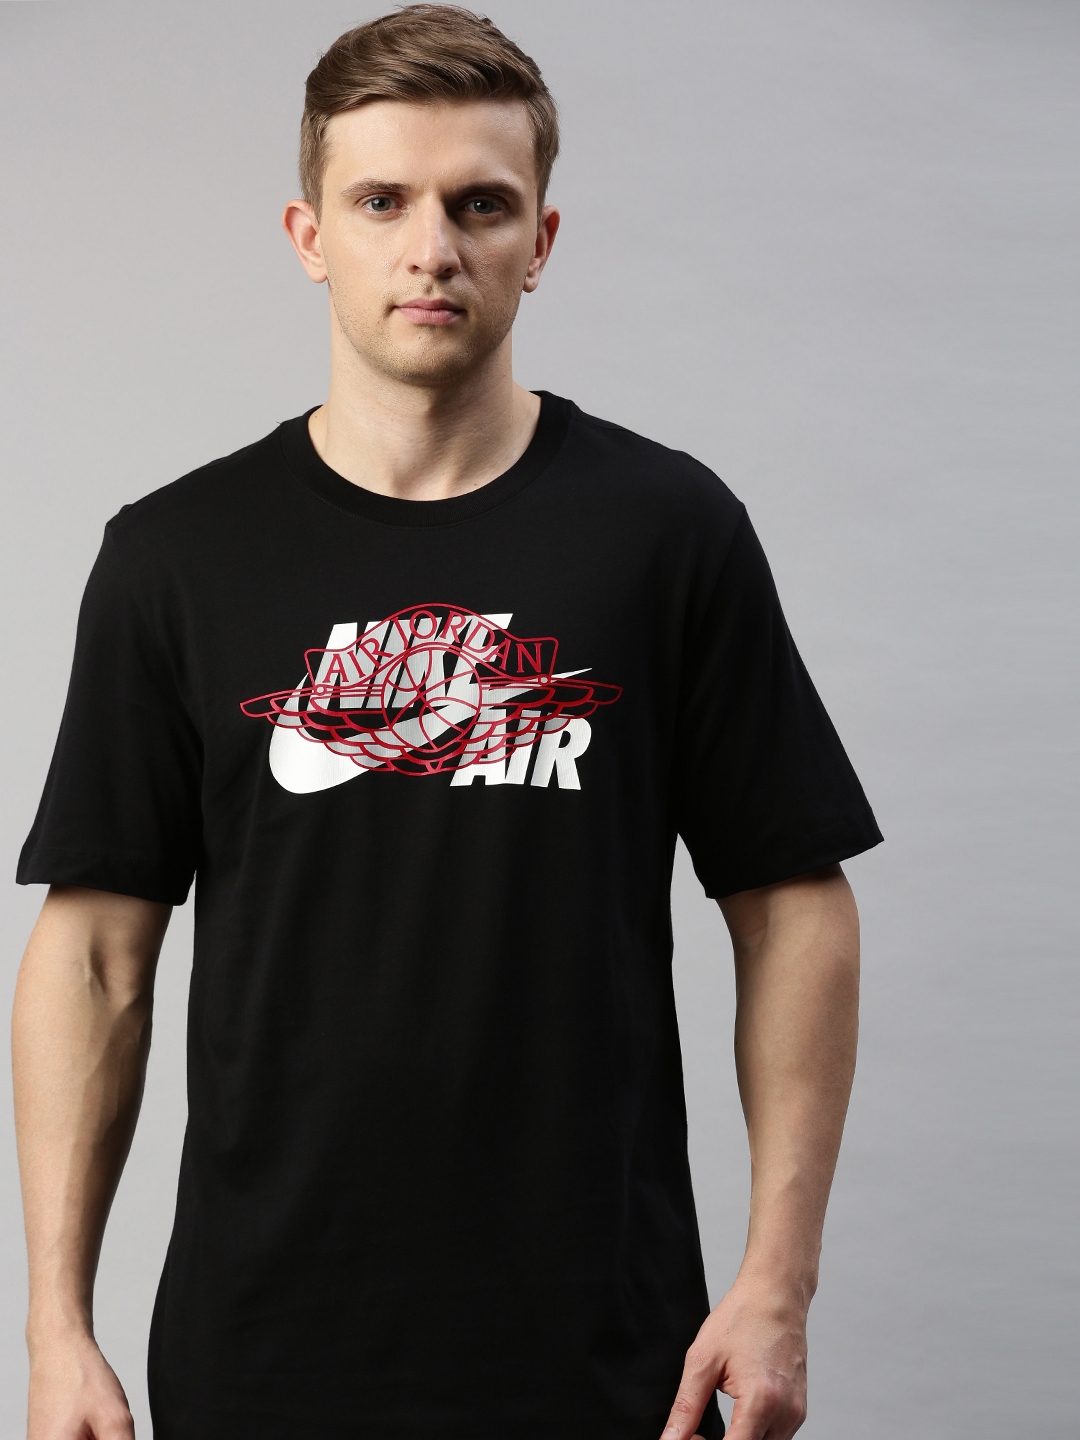 Buy Nike Men Black Printed Round Neck Active HBR WINGS AIR Pure Cotton ...